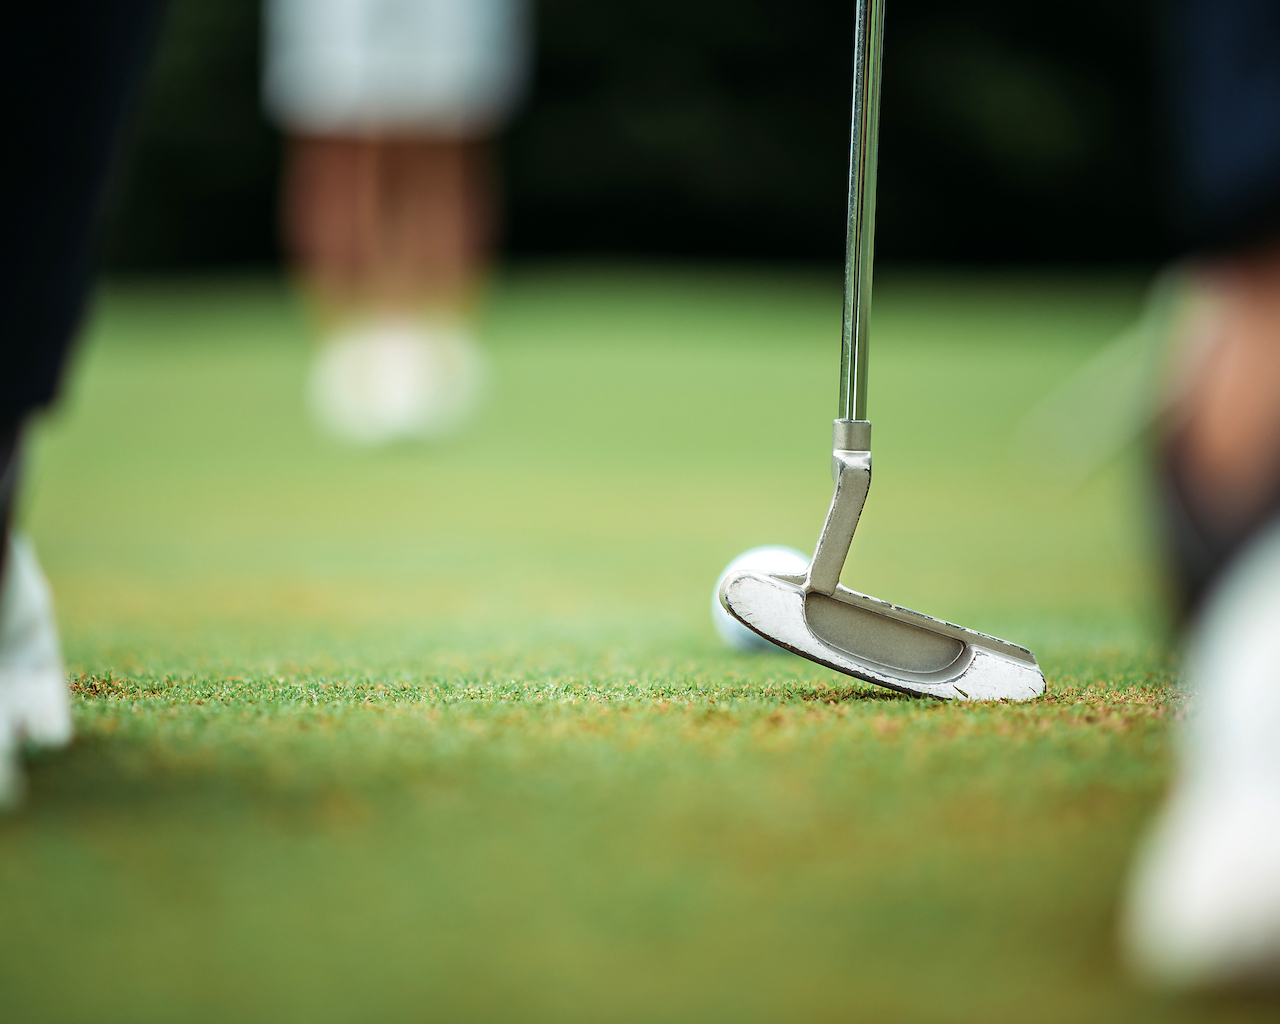 Putter and ball on putting green